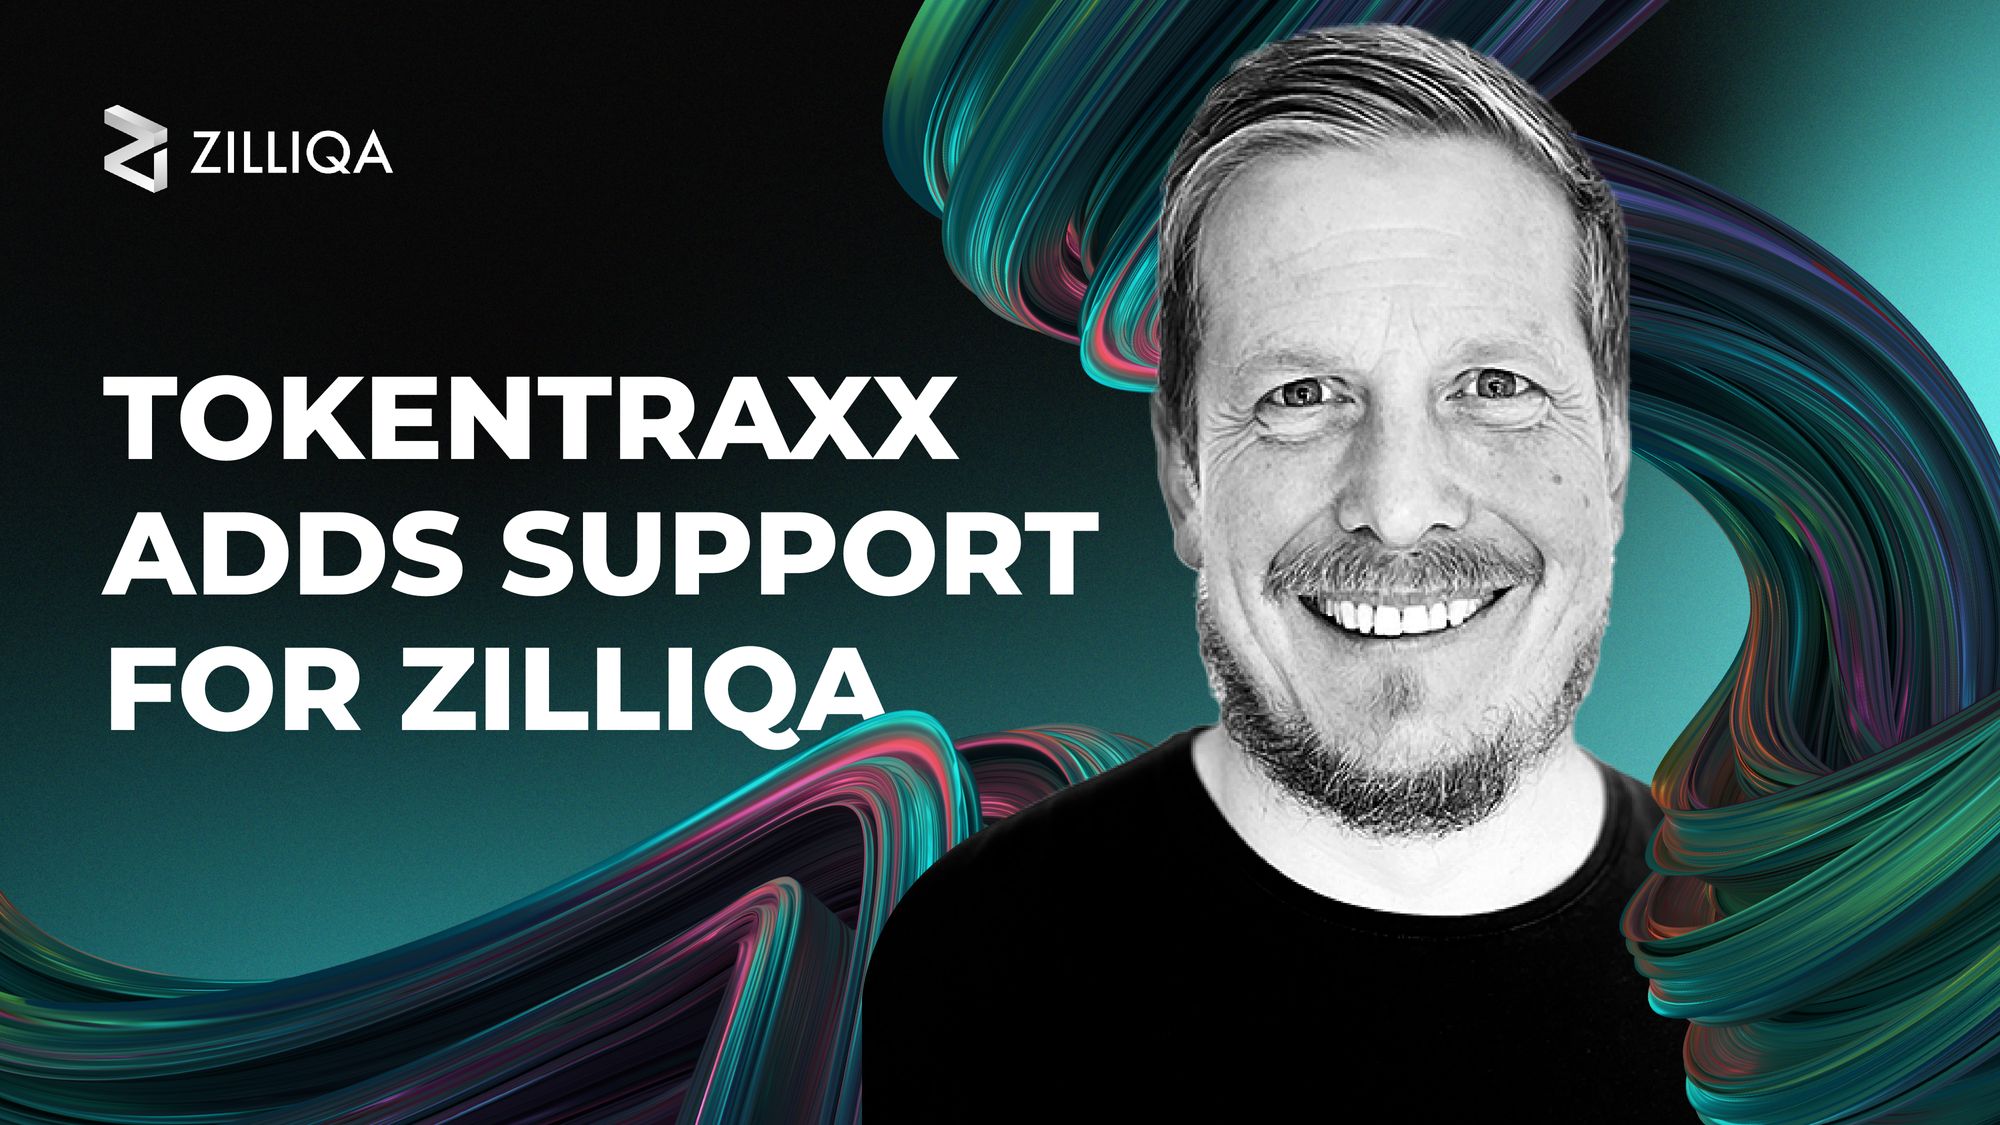 TokenTraxx adds support for Zilliqa - Interview with CEO Tim Gentry